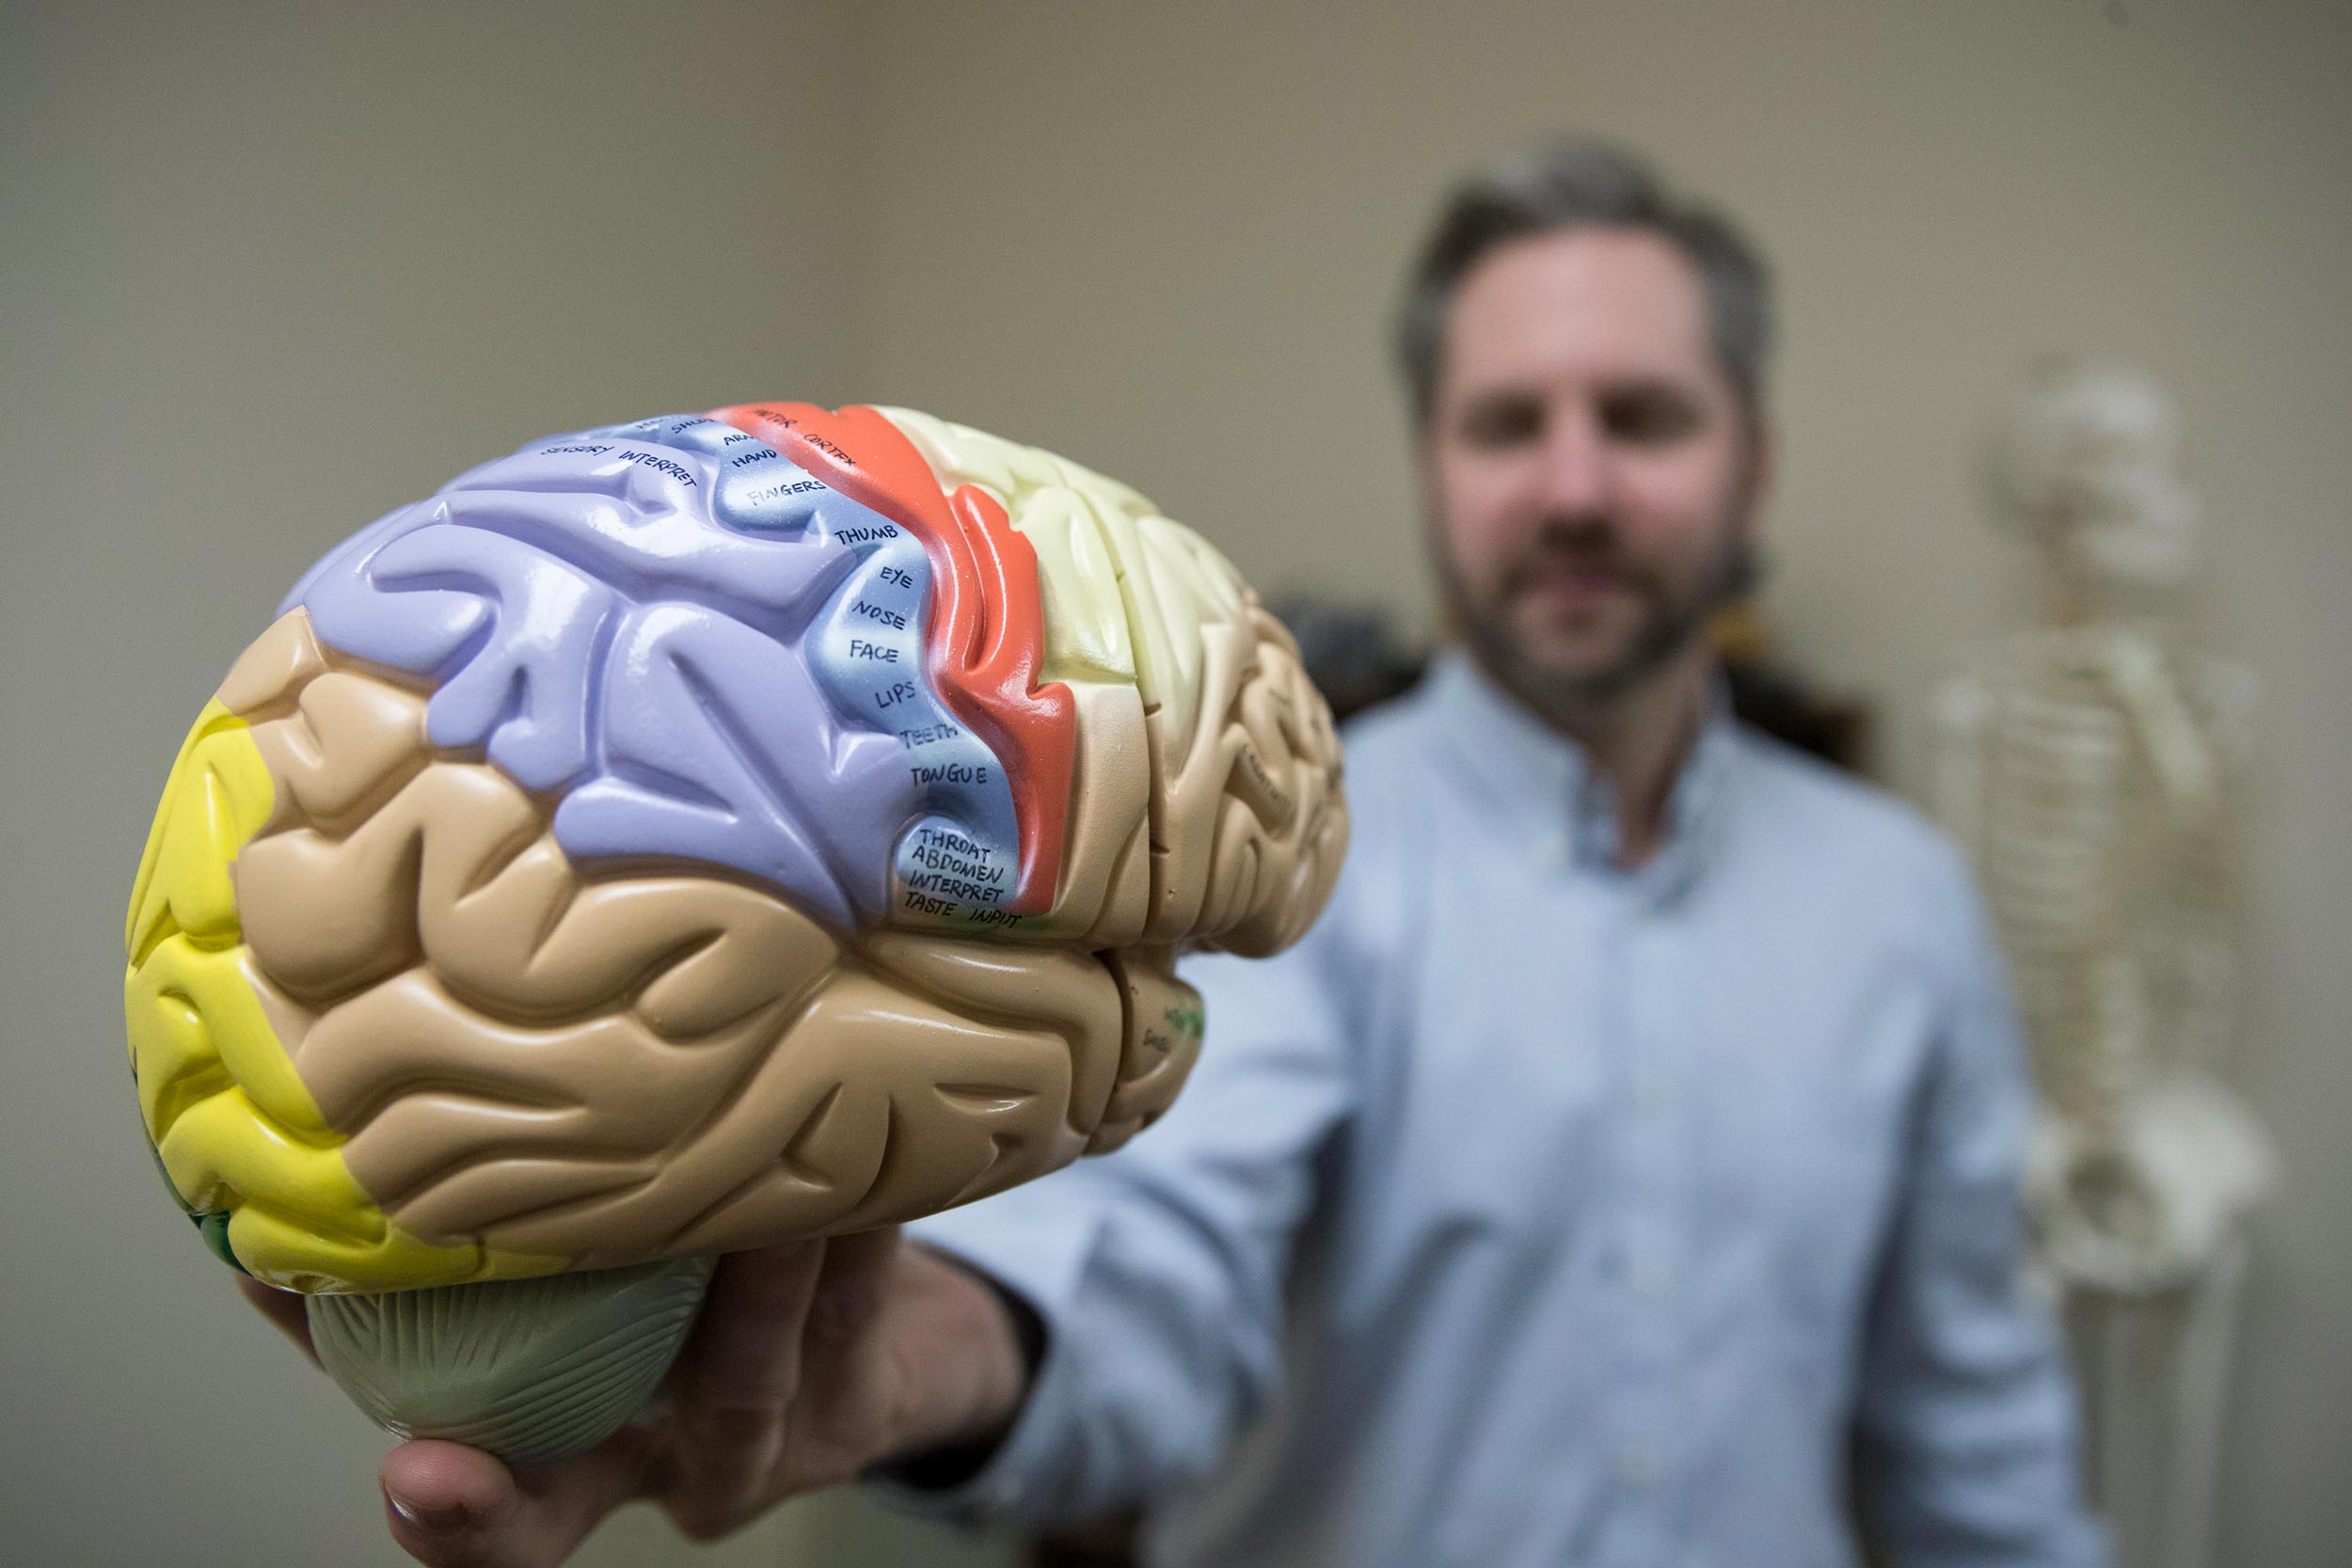 Matthew Panzer holds a 3d model of a human brain that has different colors